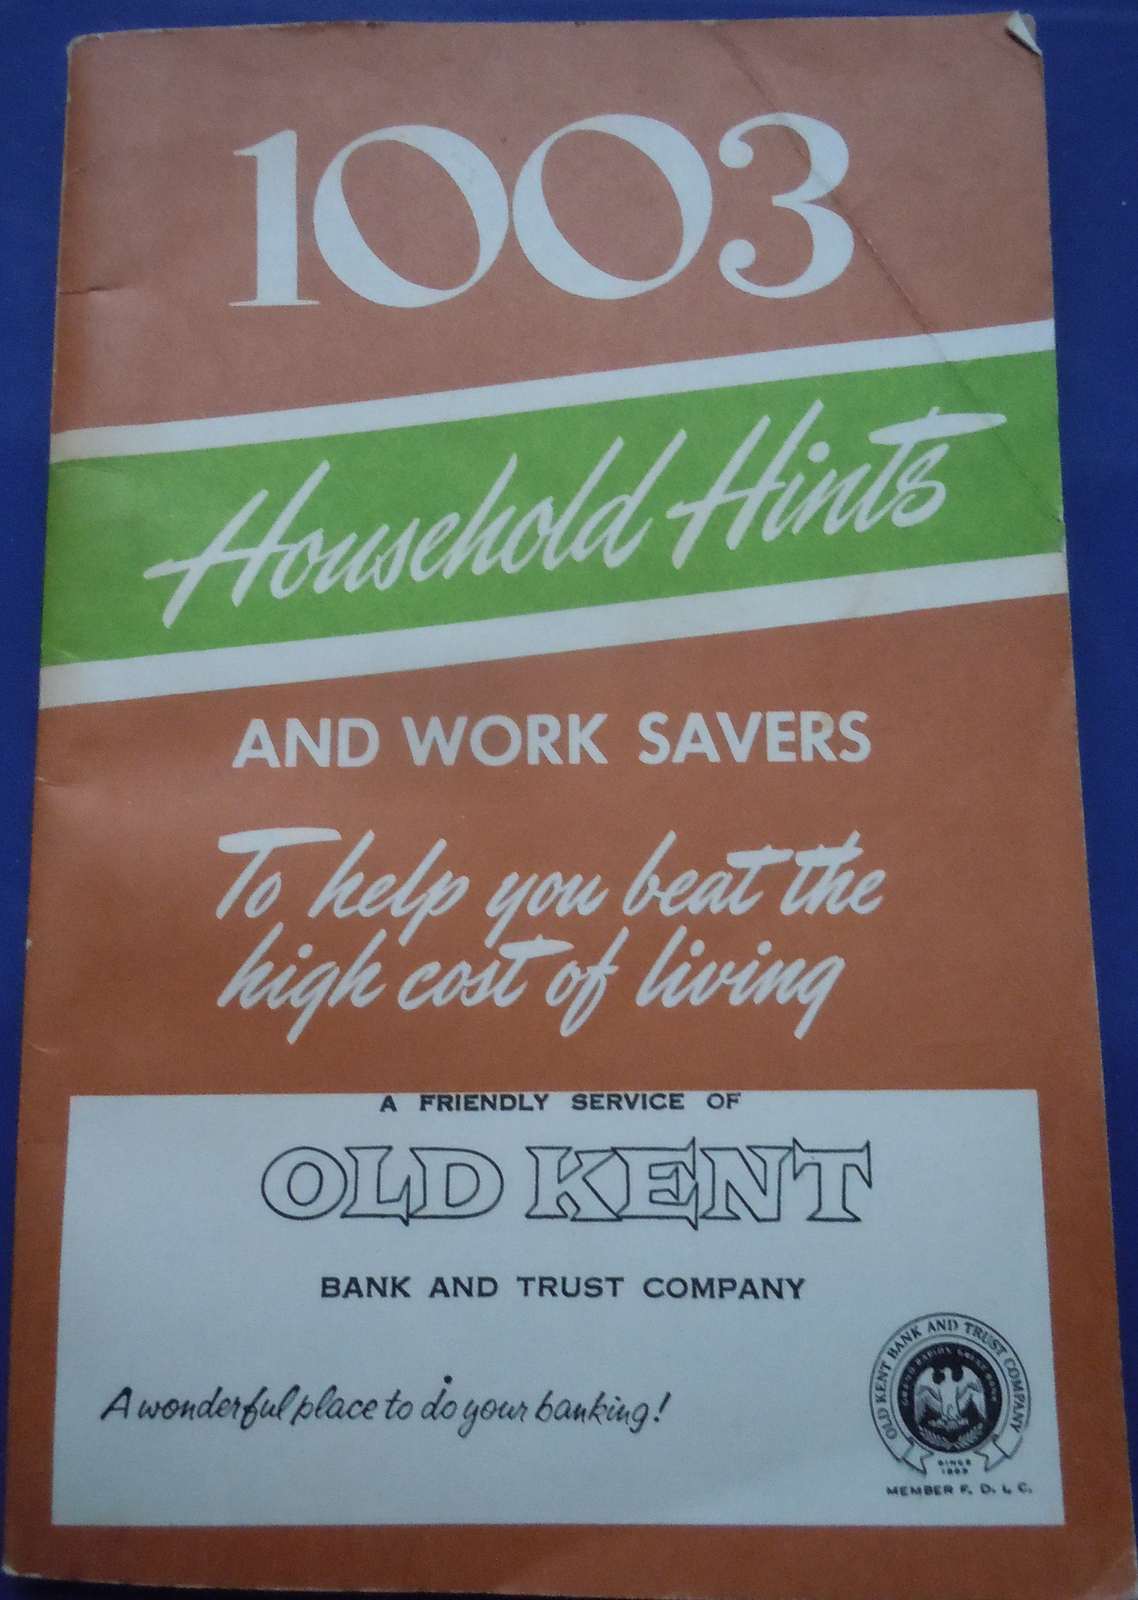 Vintage 1003 Household Hints Book From Old Kent Bank 1948 - $4.99